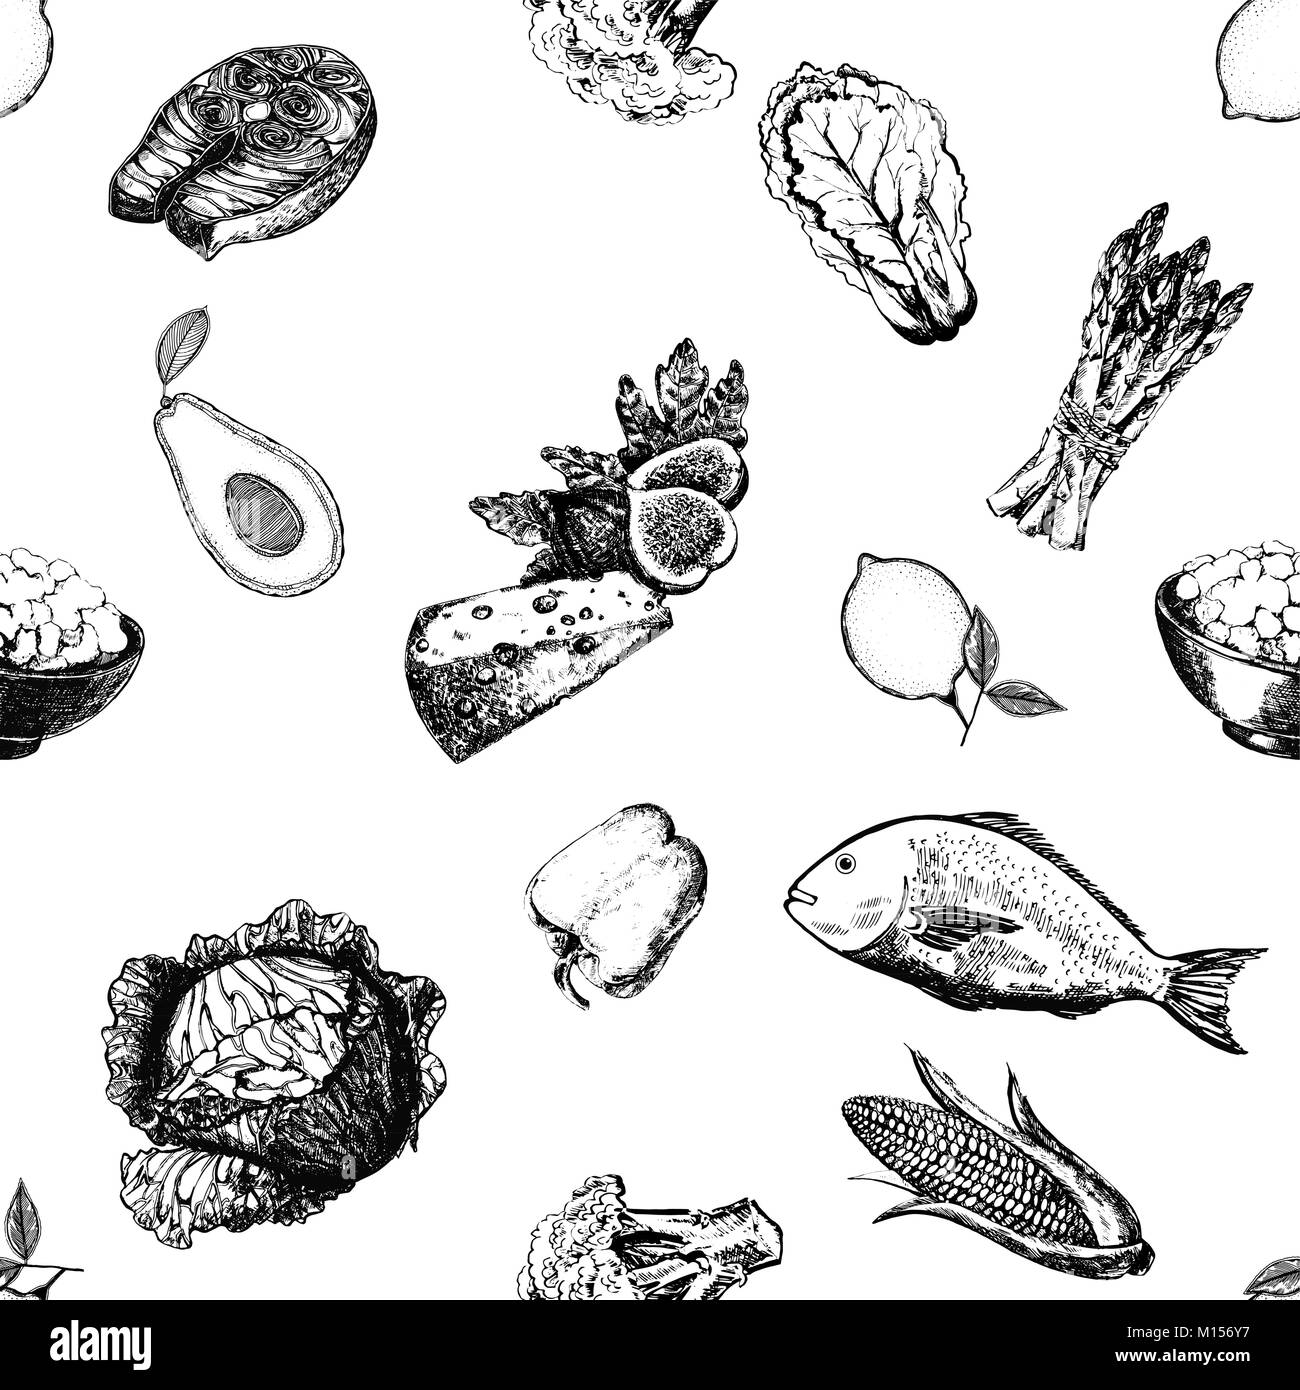 Seamless pattern of hand drawn sketch style isolated food. Vector illustration. Stock Vector